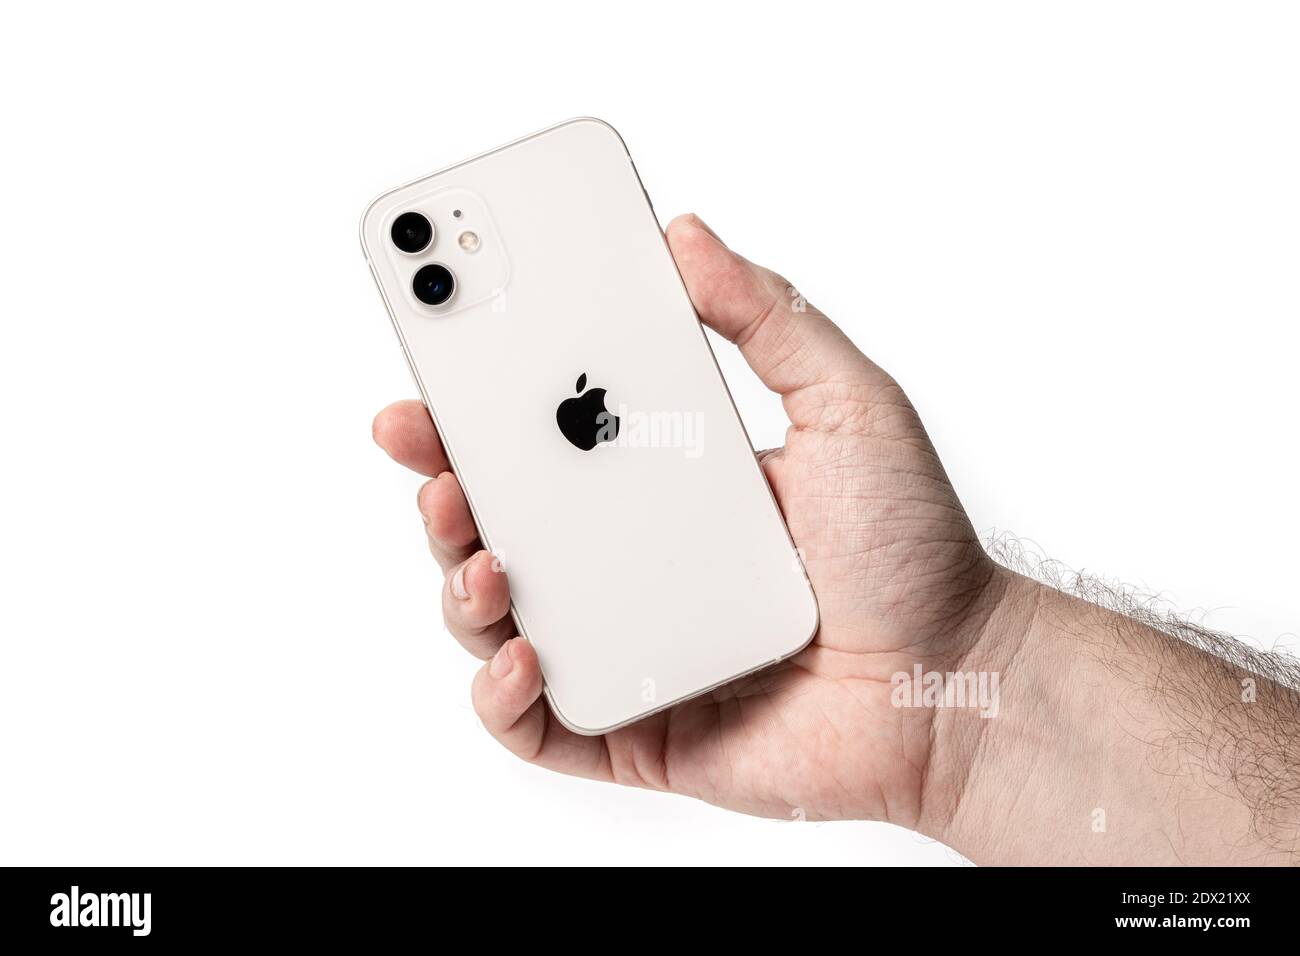 Antalya, Turkey - December 23, 2020: New design iPhone 12 in the white color in the hand of a customer. Stock Photo